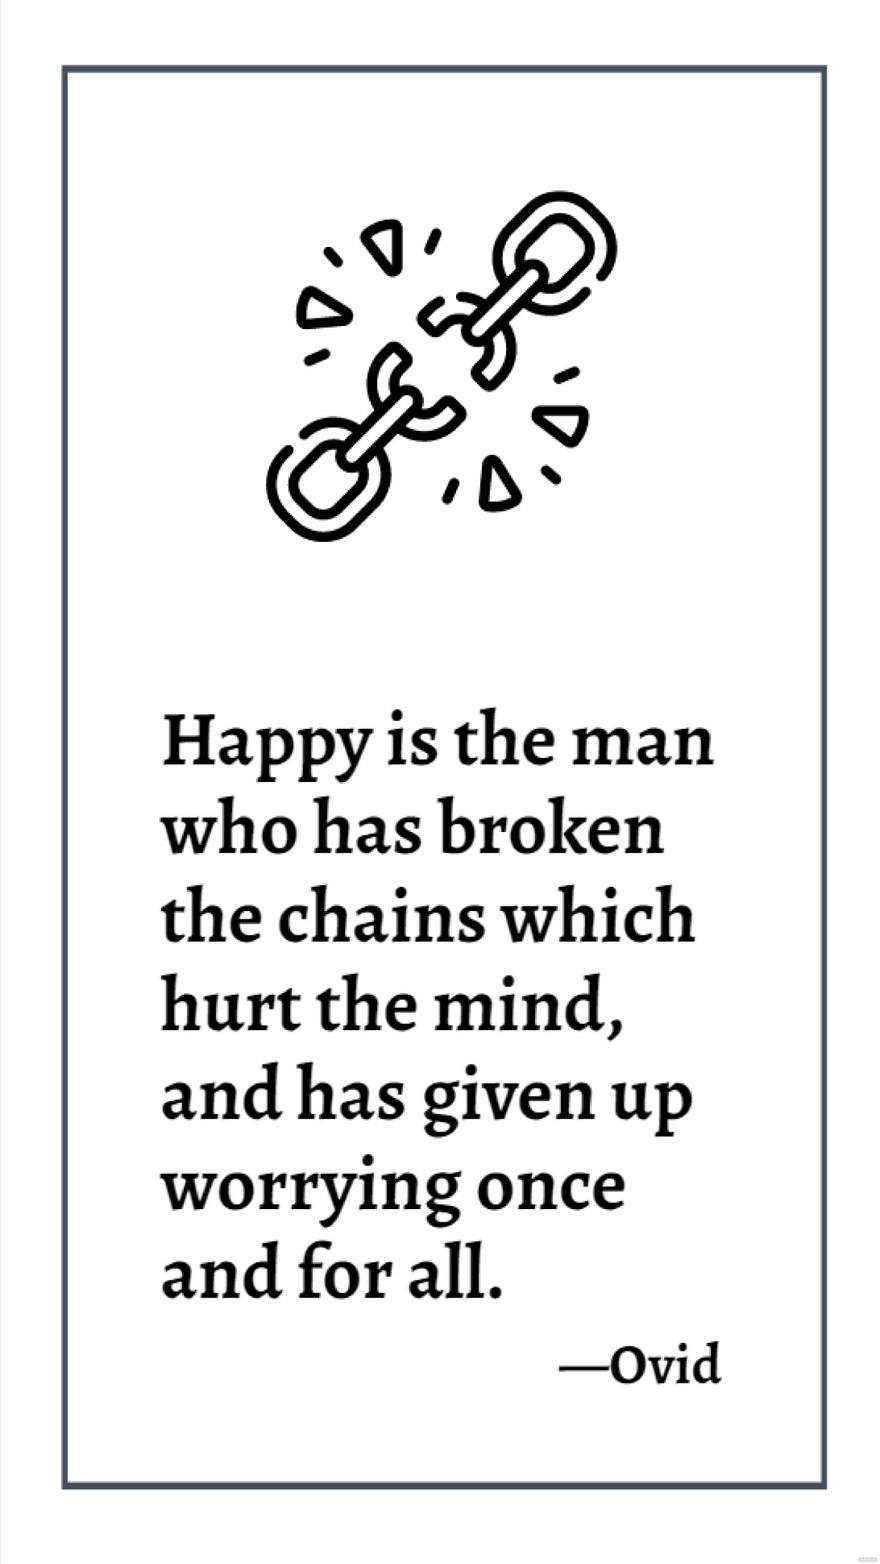 Ovid - Happy is the man who has broken the chains which hurt the mind, and has given up worrying once and for all.